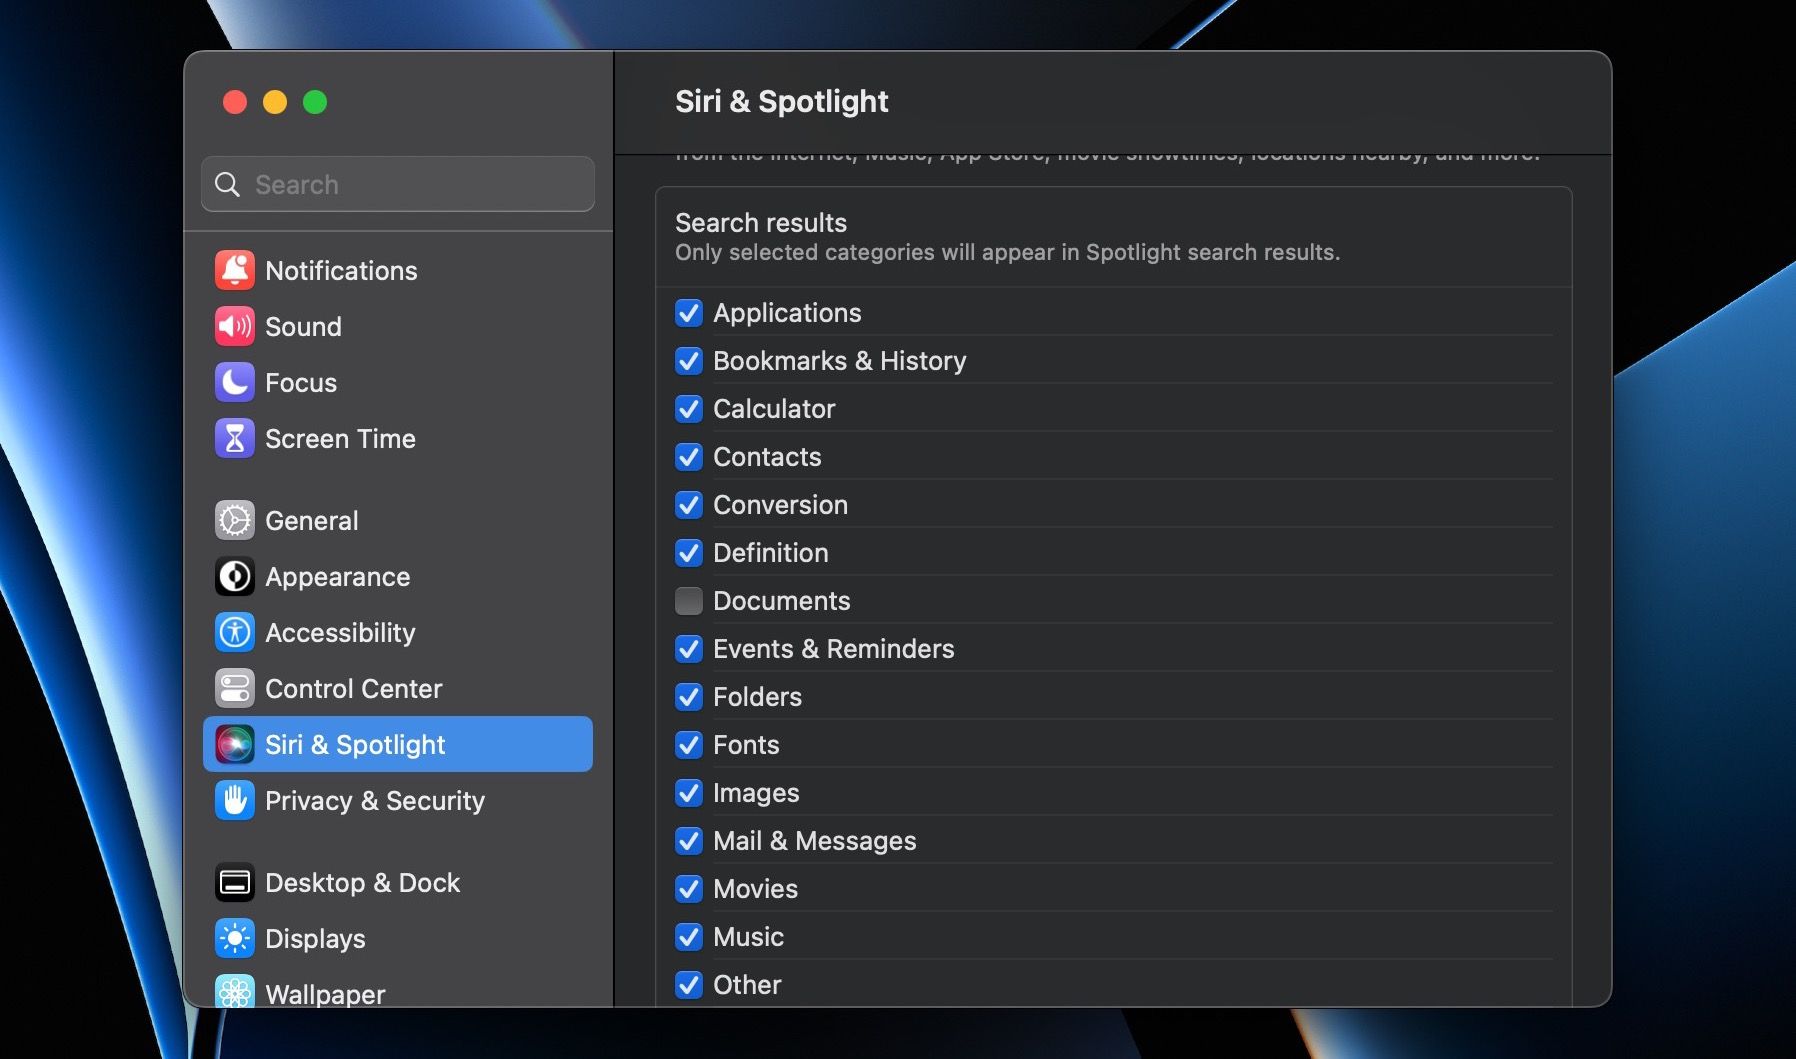 Select which categories to show in Spotlight search results